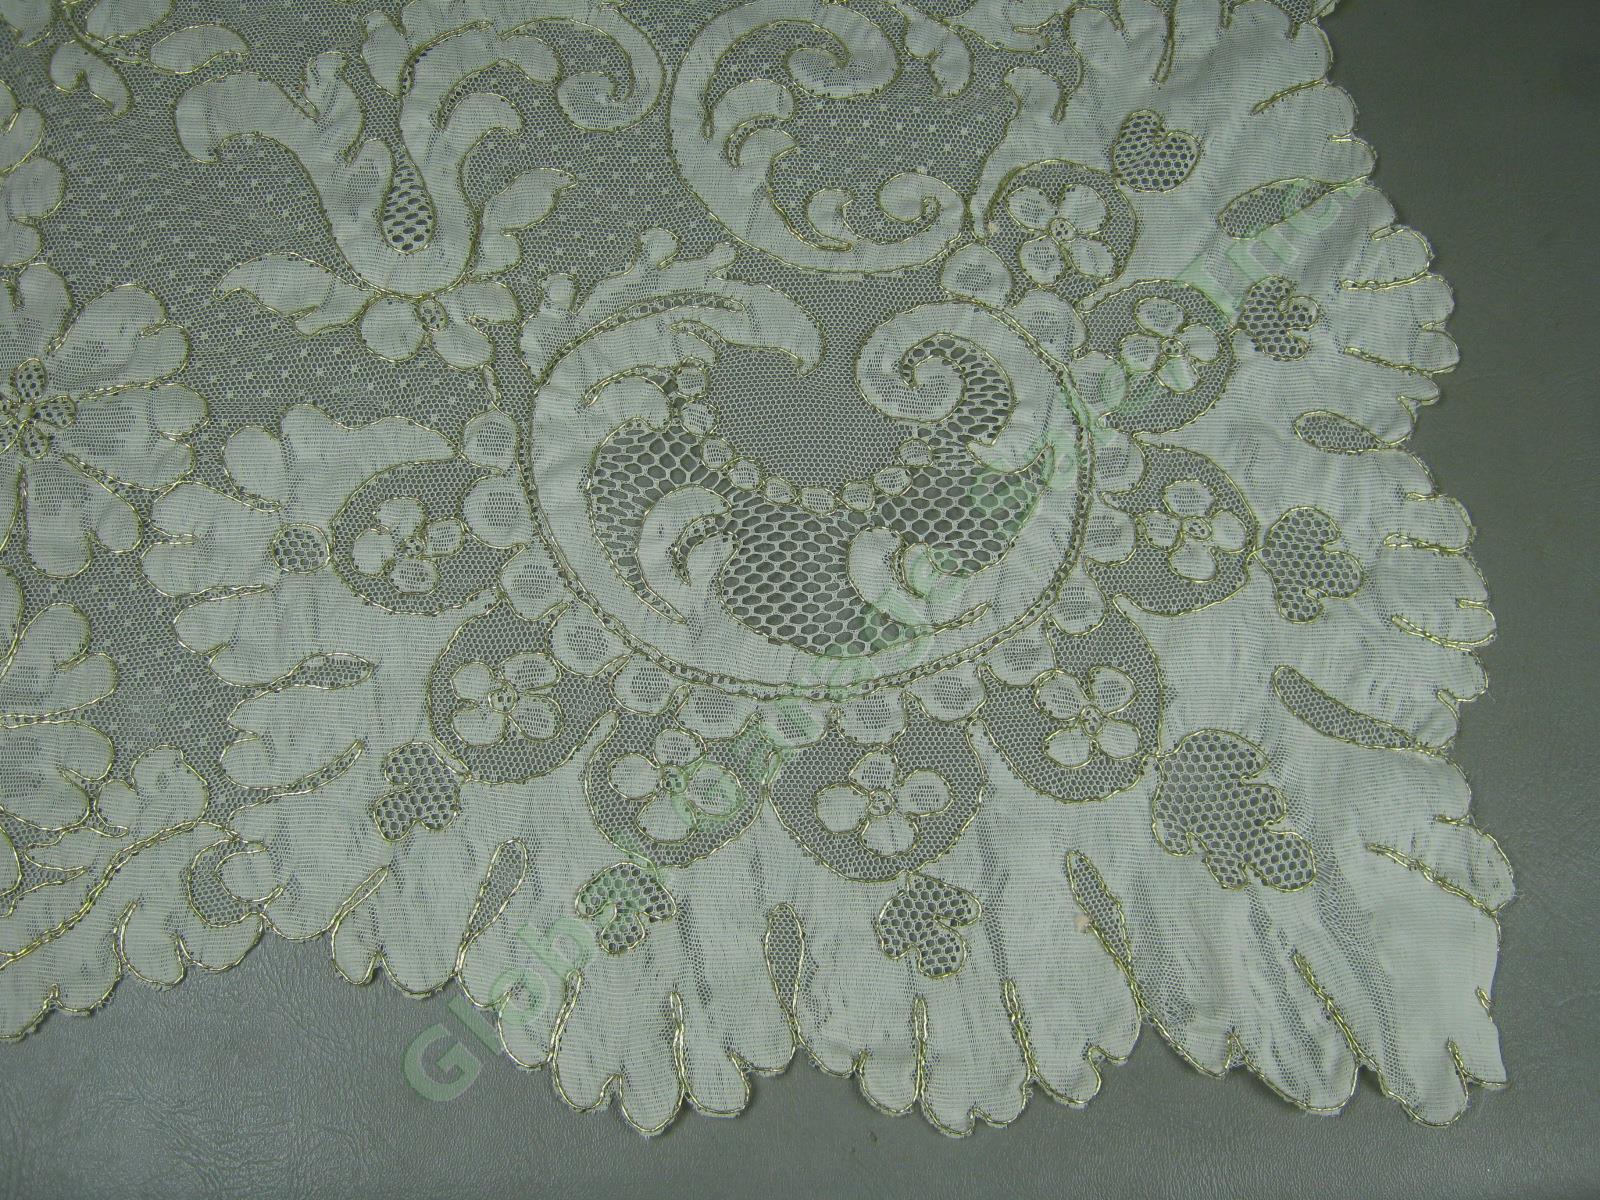 Vtg Antique French Point Lace Ivory Gold Tablecloth Runner Doily Linens Set Lot 2